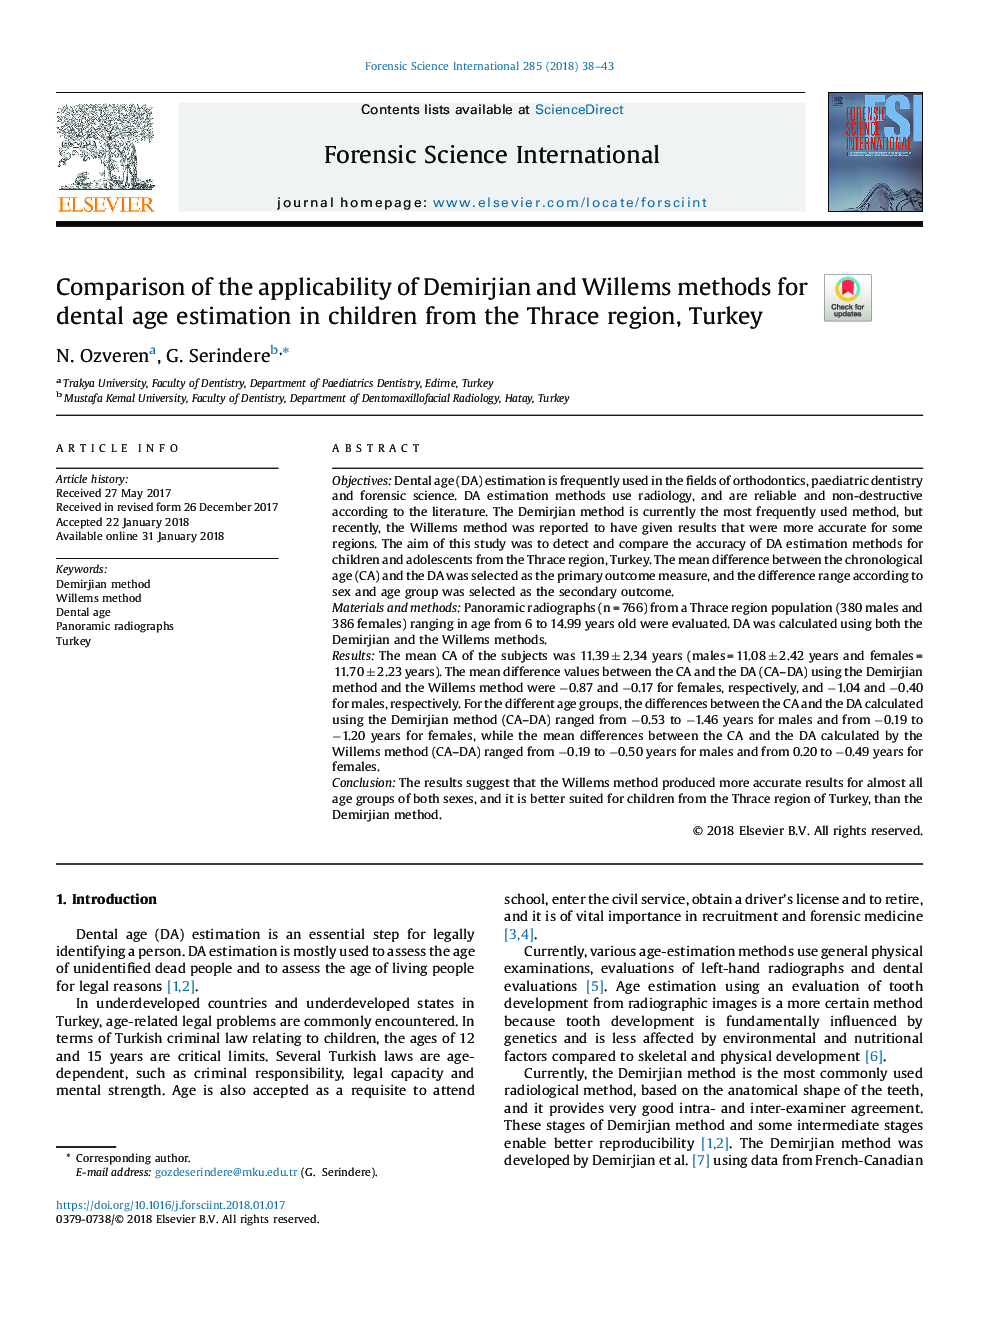 Comparison of the applicability of Demirjian and Willems methods for dental age estimation in children from the Thrace region, Turkey